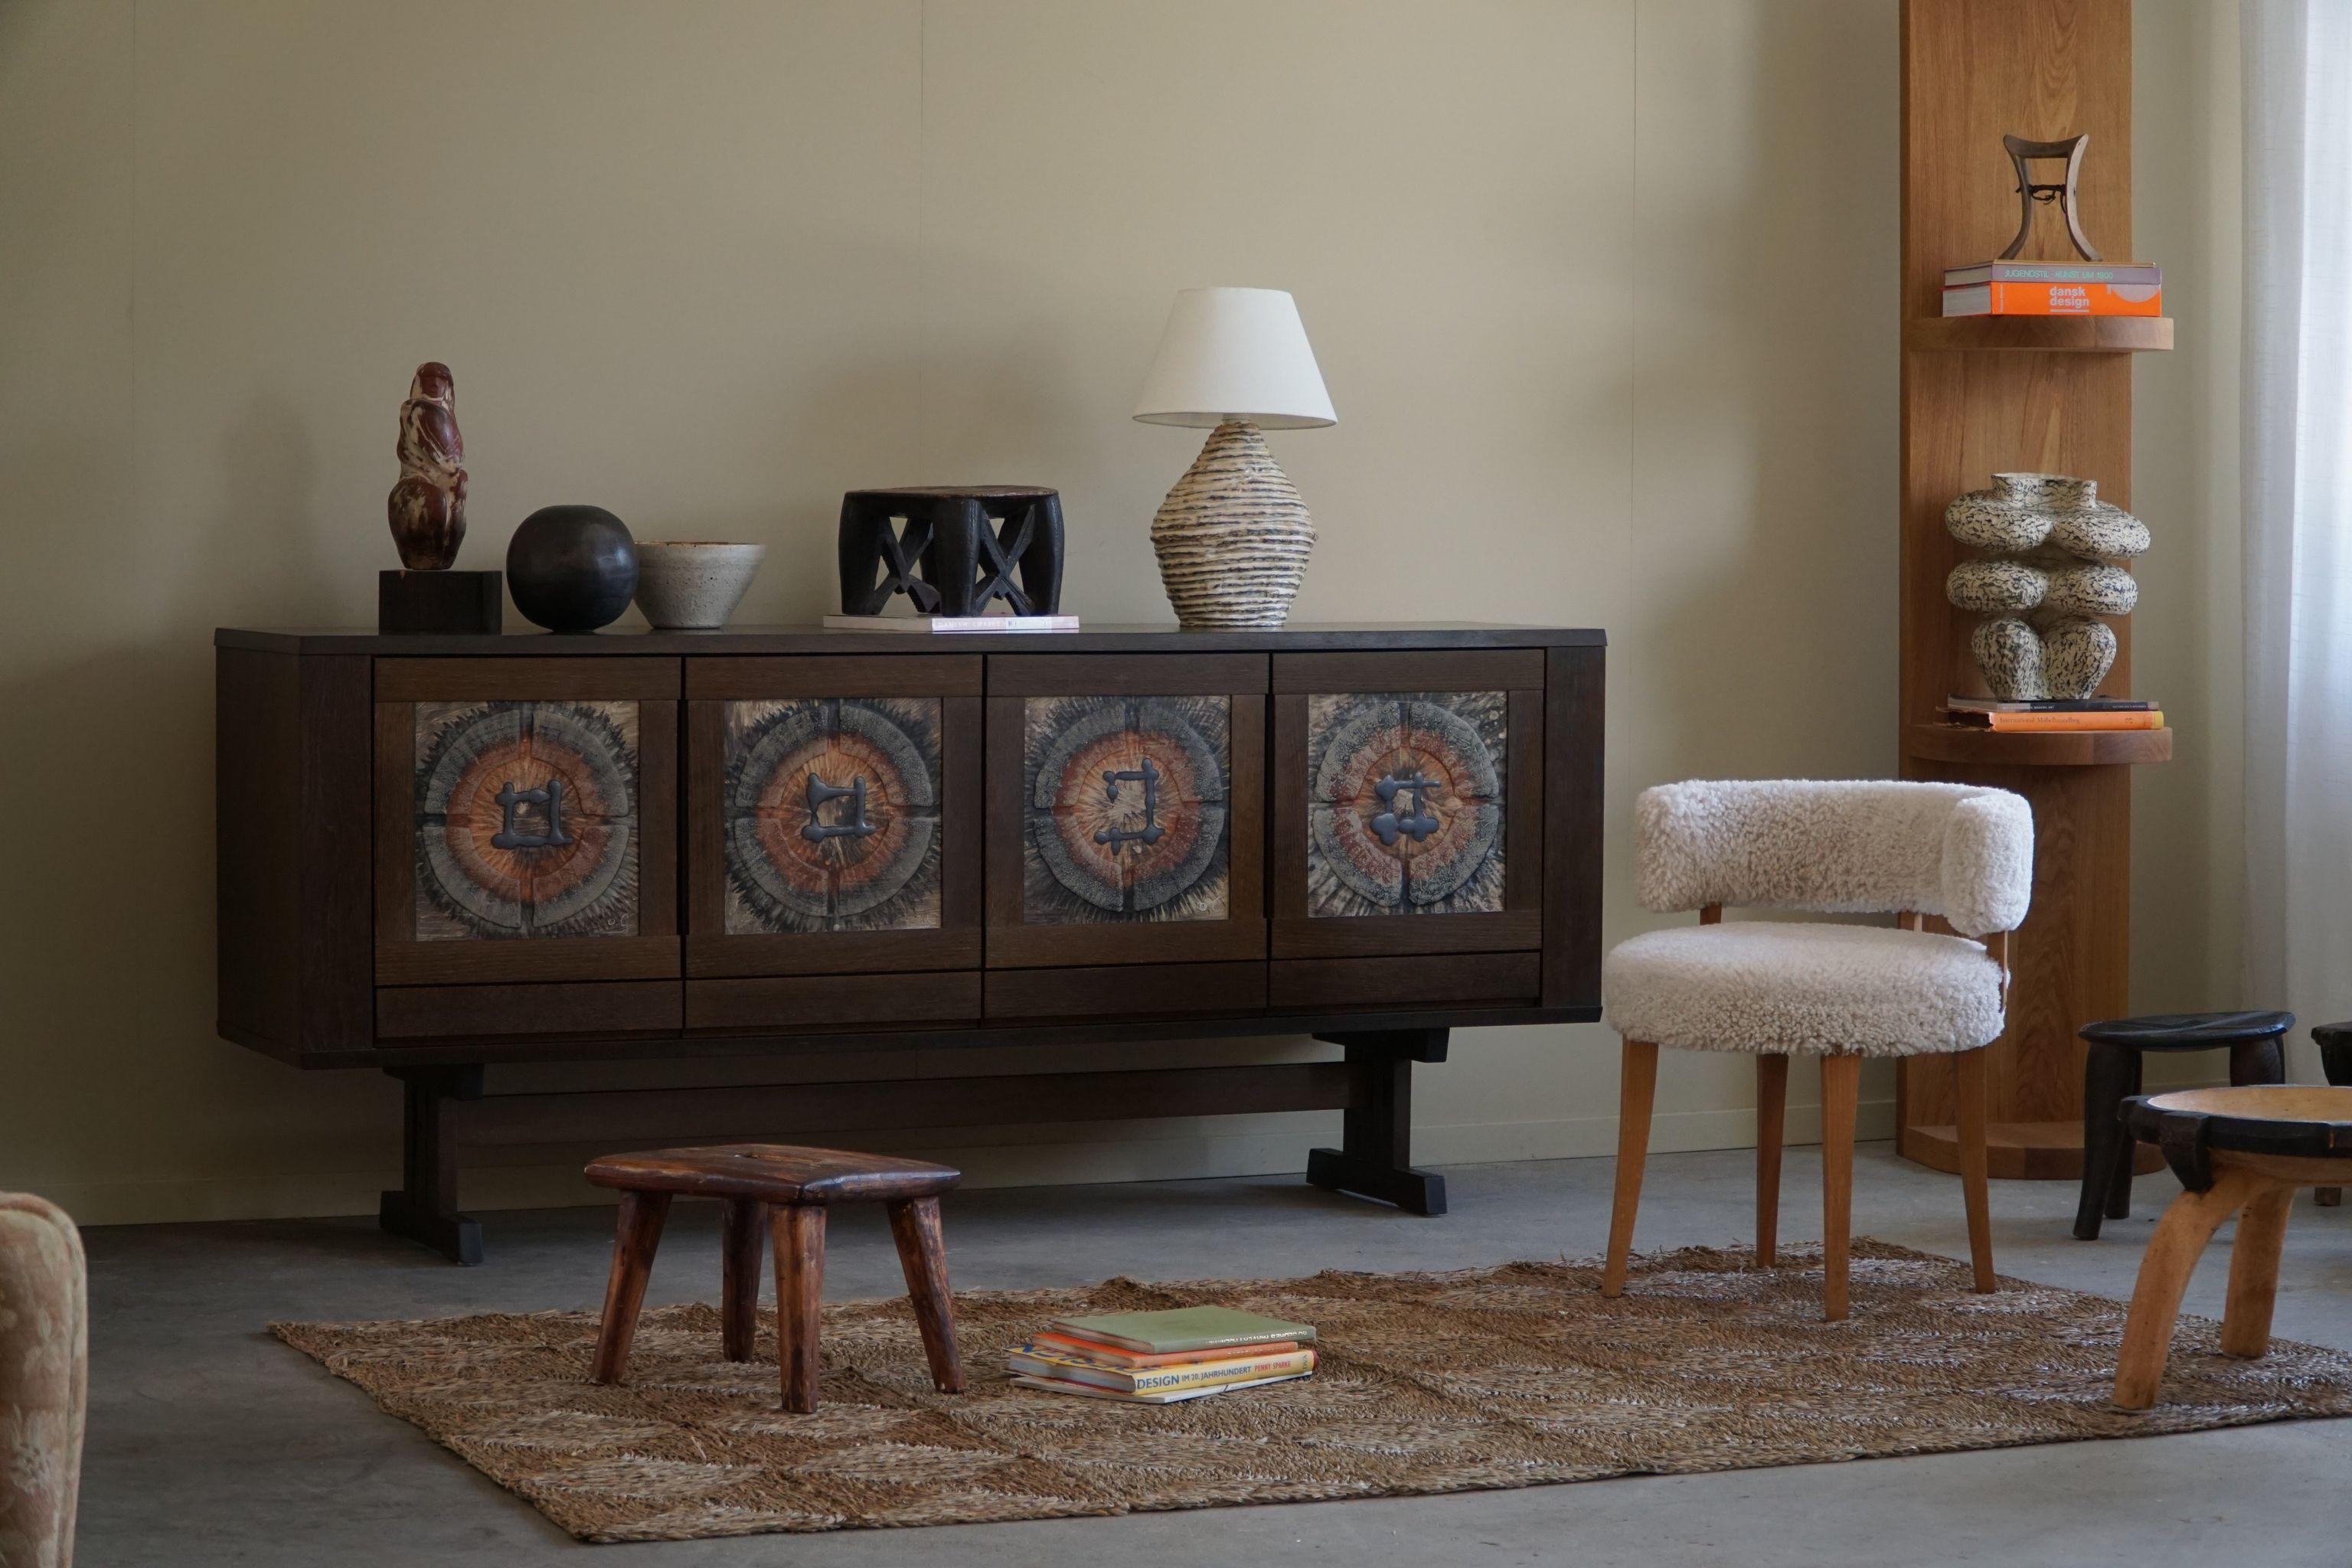 Experience the timeless elegance and craftsmanship of Danish Modern design with this exquisite low sideboard by Skovby, created during the 1970s. Crafted from stained oak and adorned with beautifully textured ceramic tiles, this piece blends form